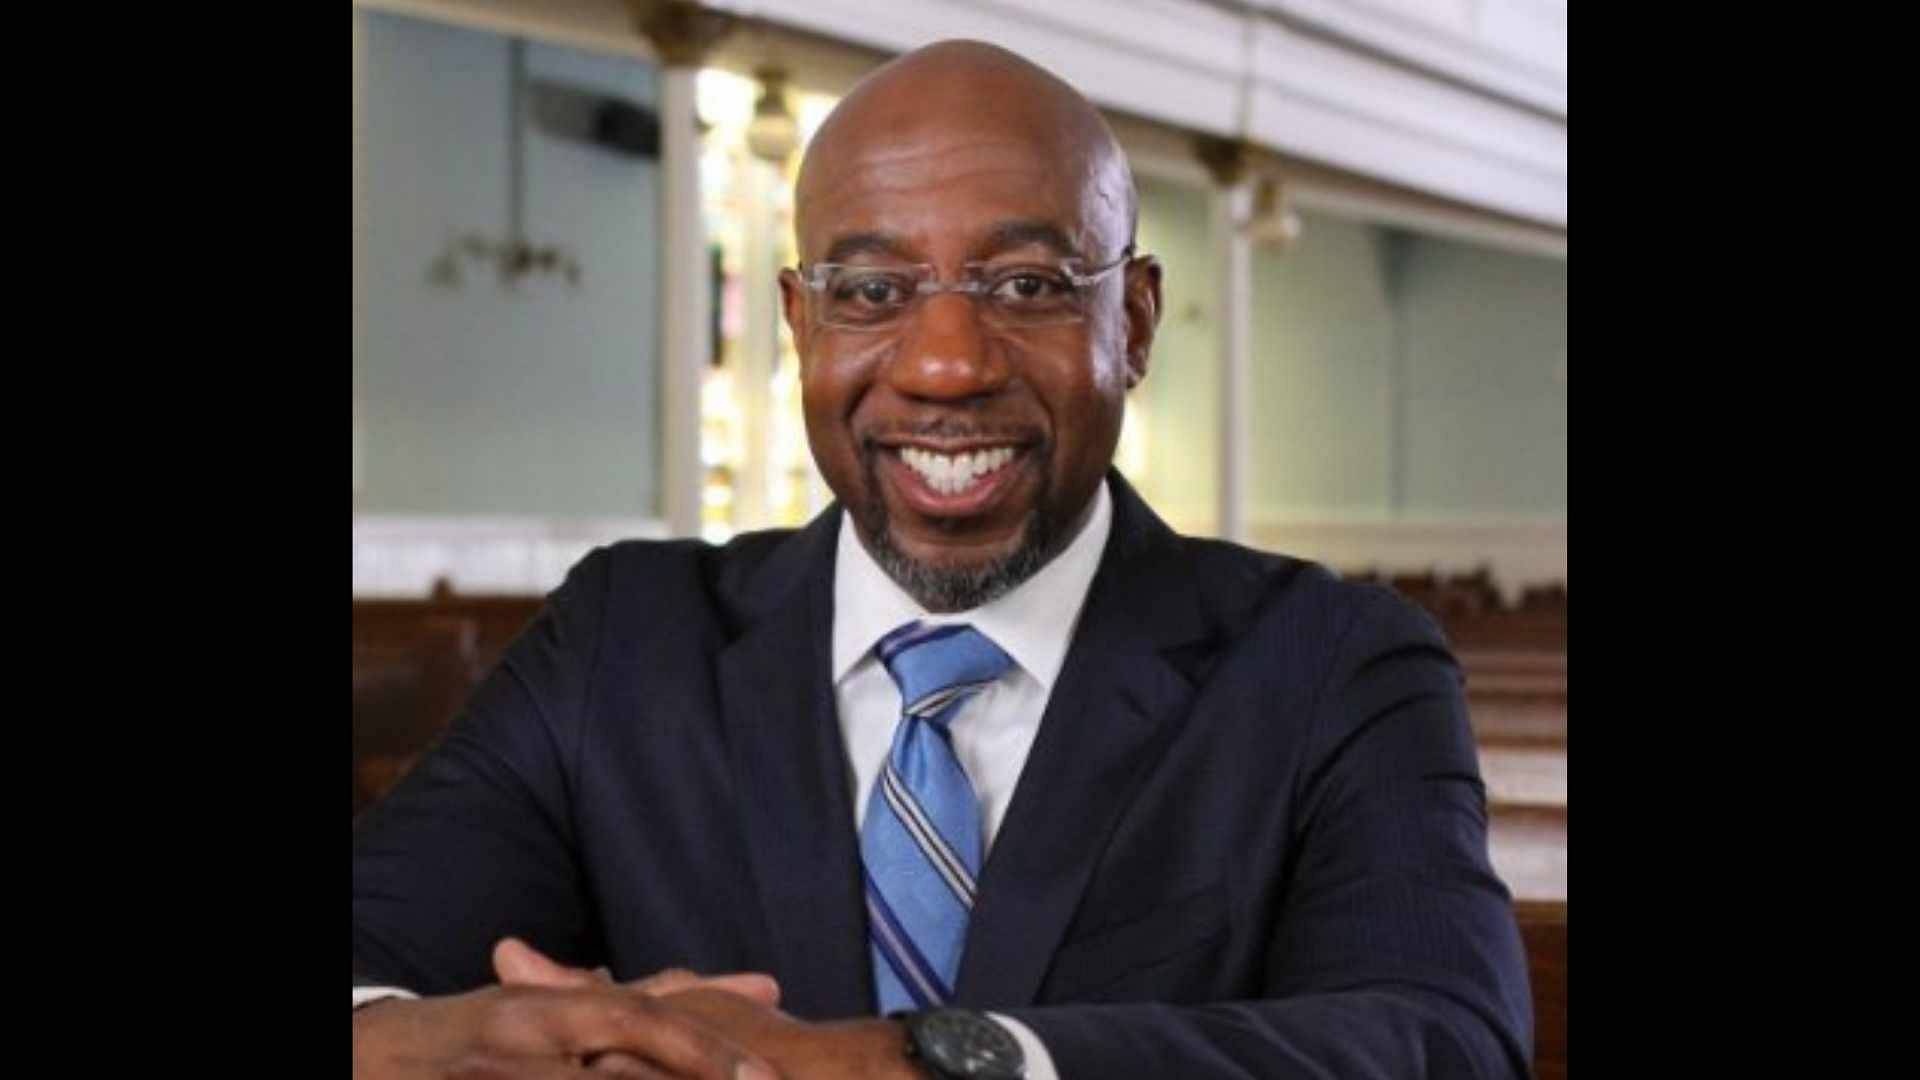 With his victory, Warnock will become the first Black US senator from Georgia.